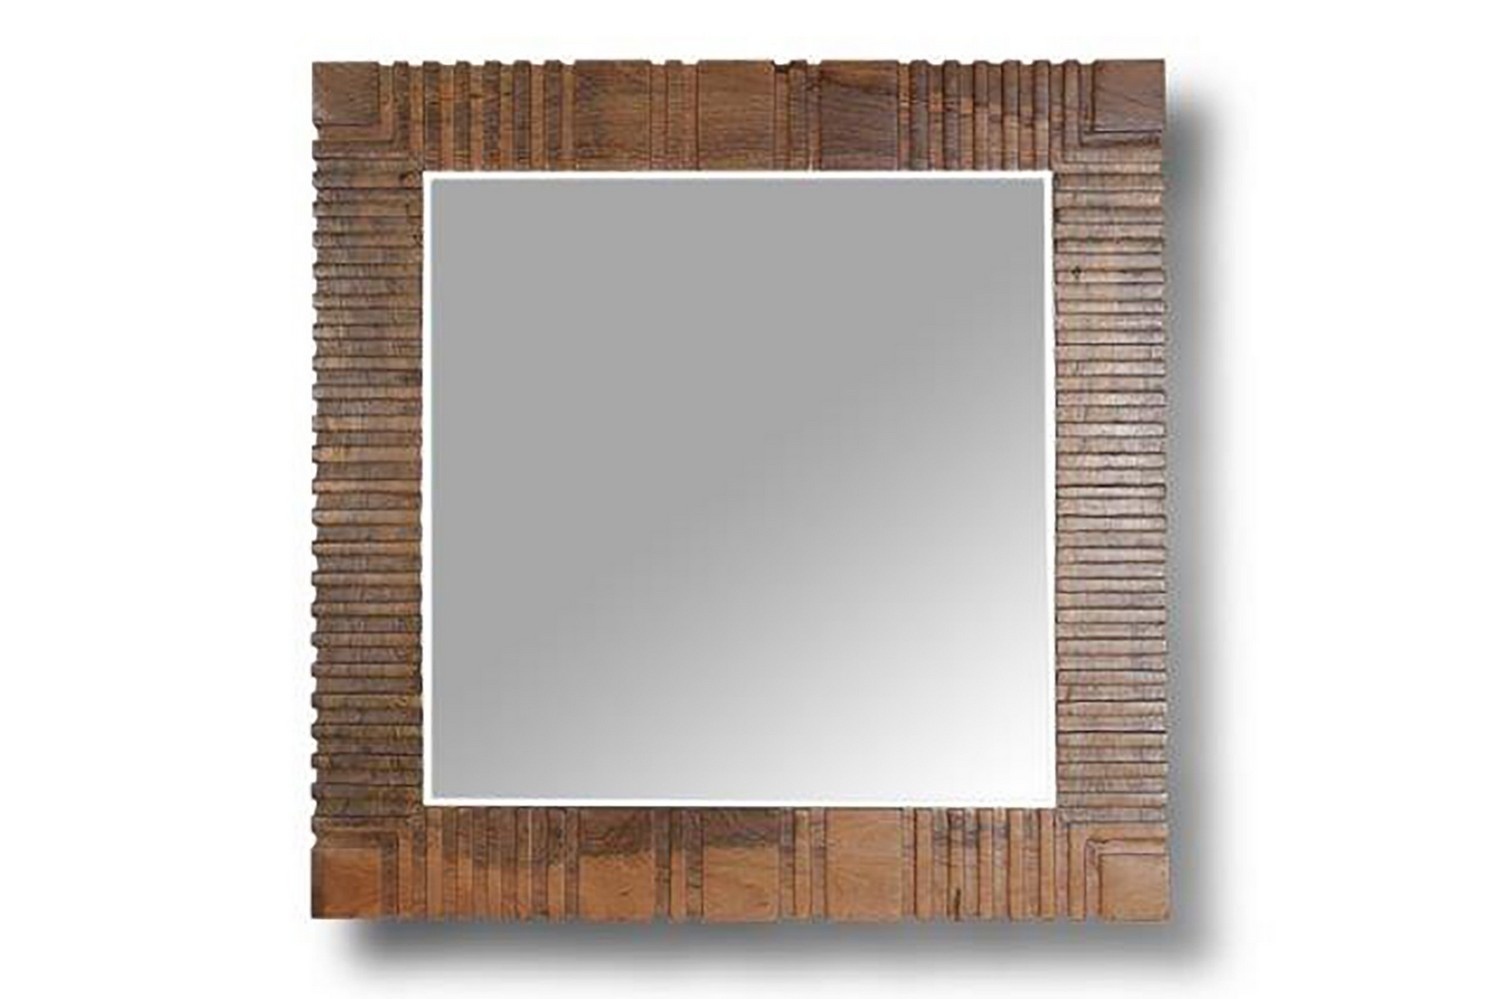 Parker House Crossings Downtown Wall Mirror - Amber